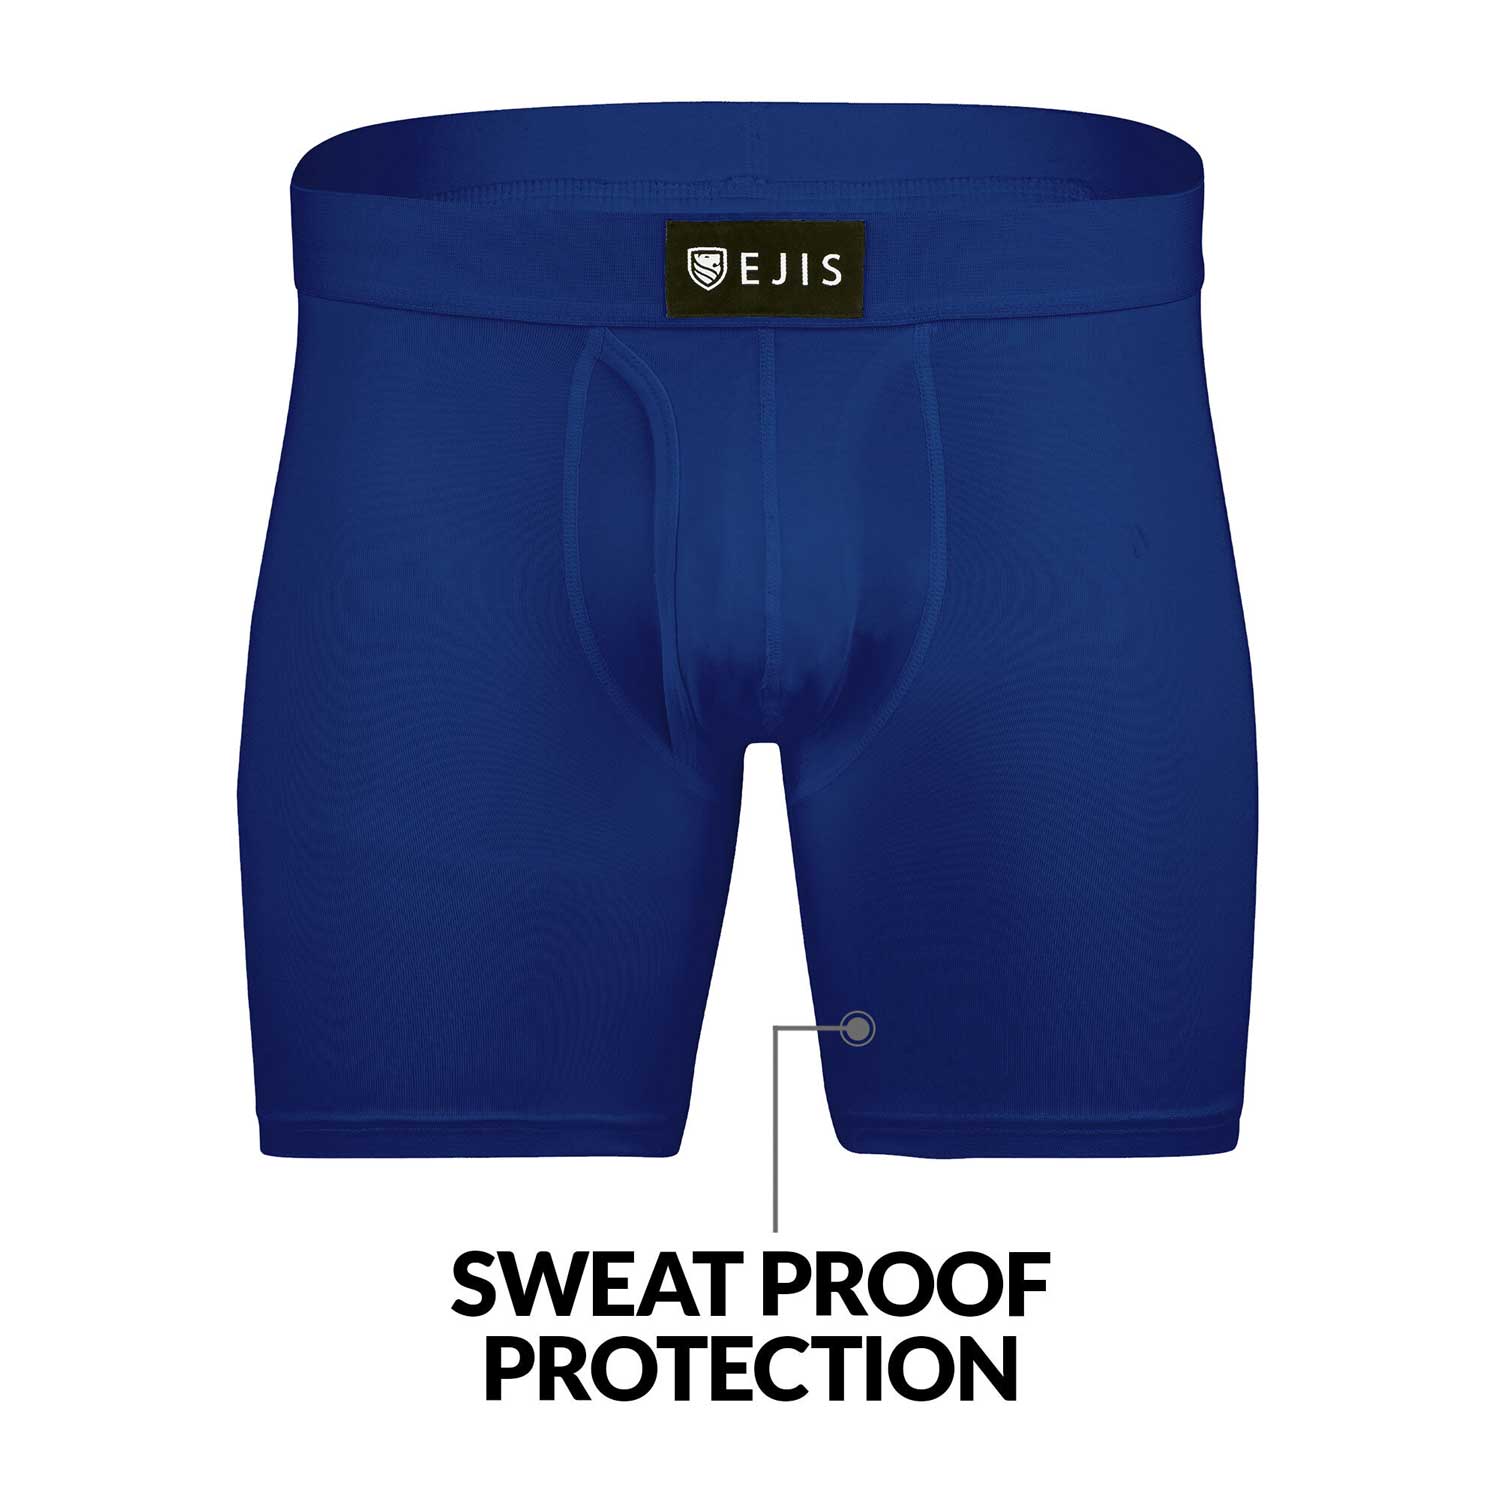 Ejis Sweatproof Mens Boxer Briefs Modal Fly India